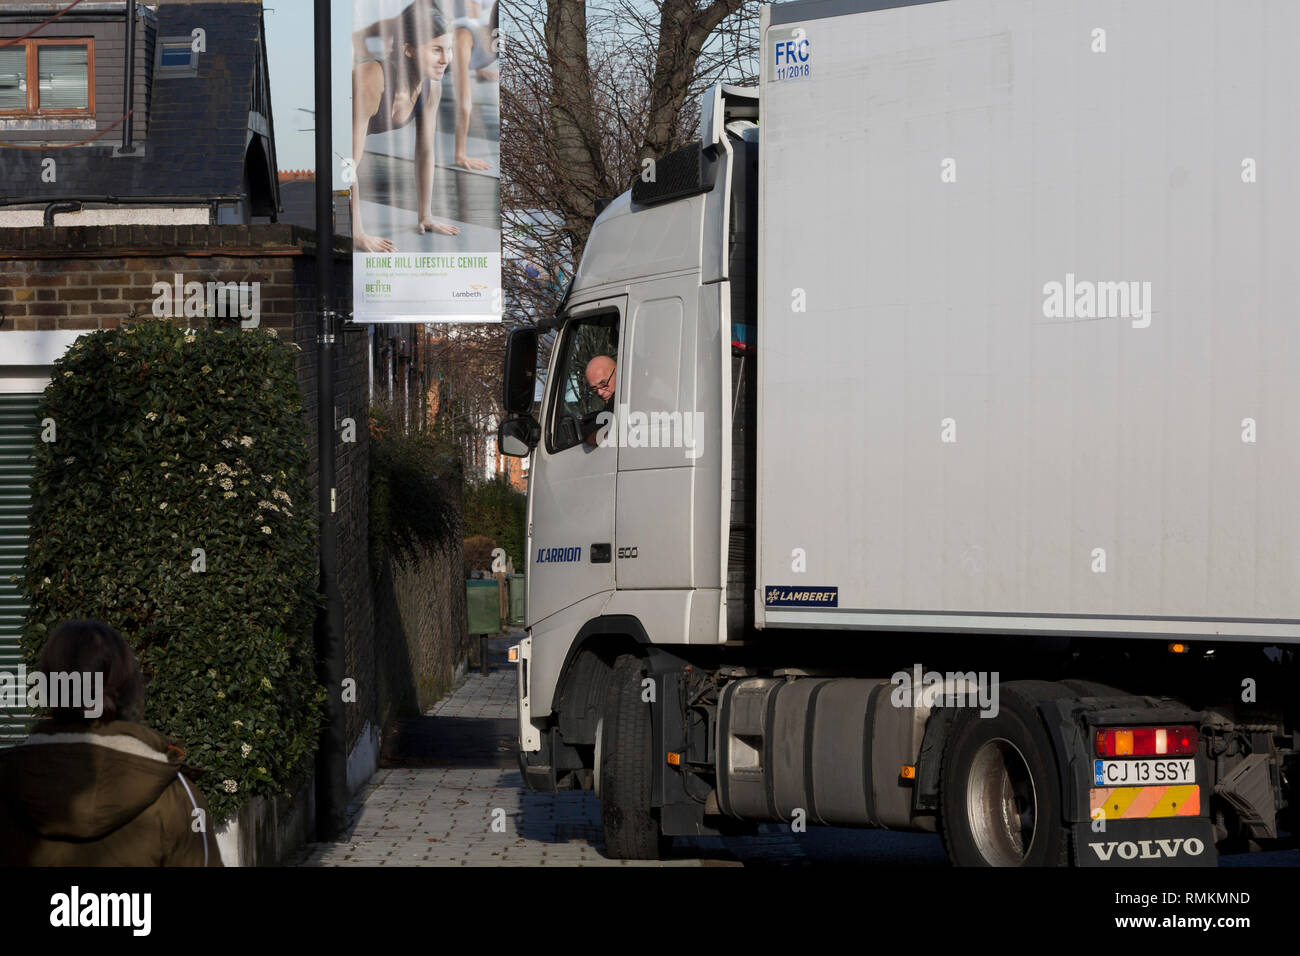 A Romanian-registered HGV lorry attempts to make a turn from Ferndene Road onto Herne Hill SE24, on 10th February 2019, in London, England. Large lorries regularly become stuck here while making this turn while following their SatNavs across south London roads. Stock Photo